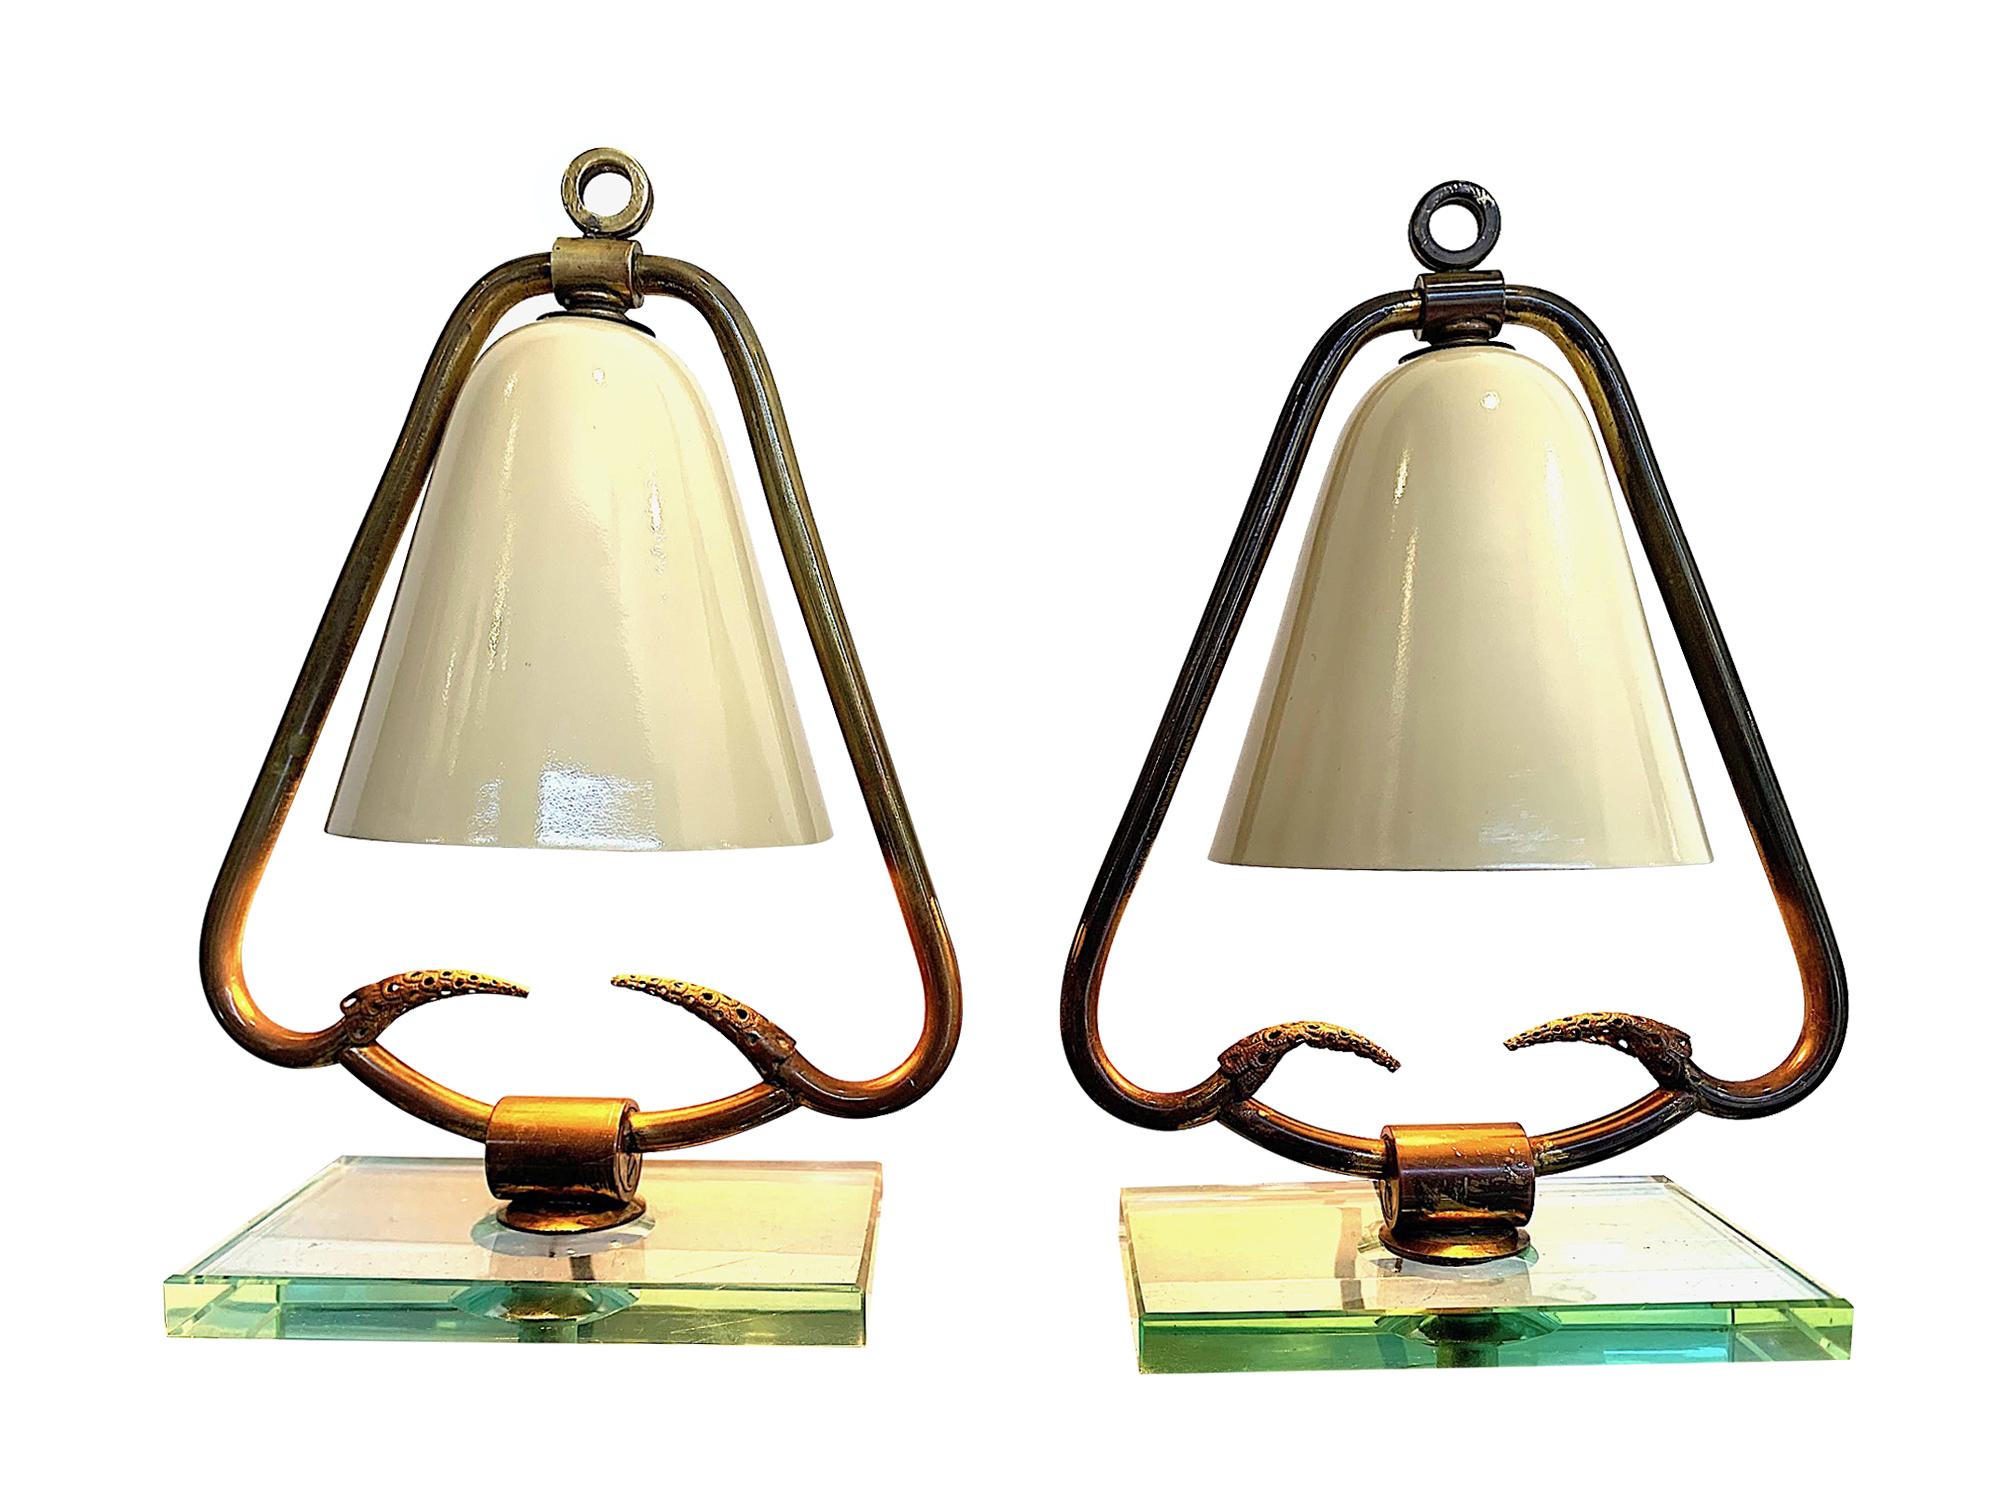 Enameled Pair of 1950s Italian Lamps with Enamel Shades on Brass Frame Mounted on Glass